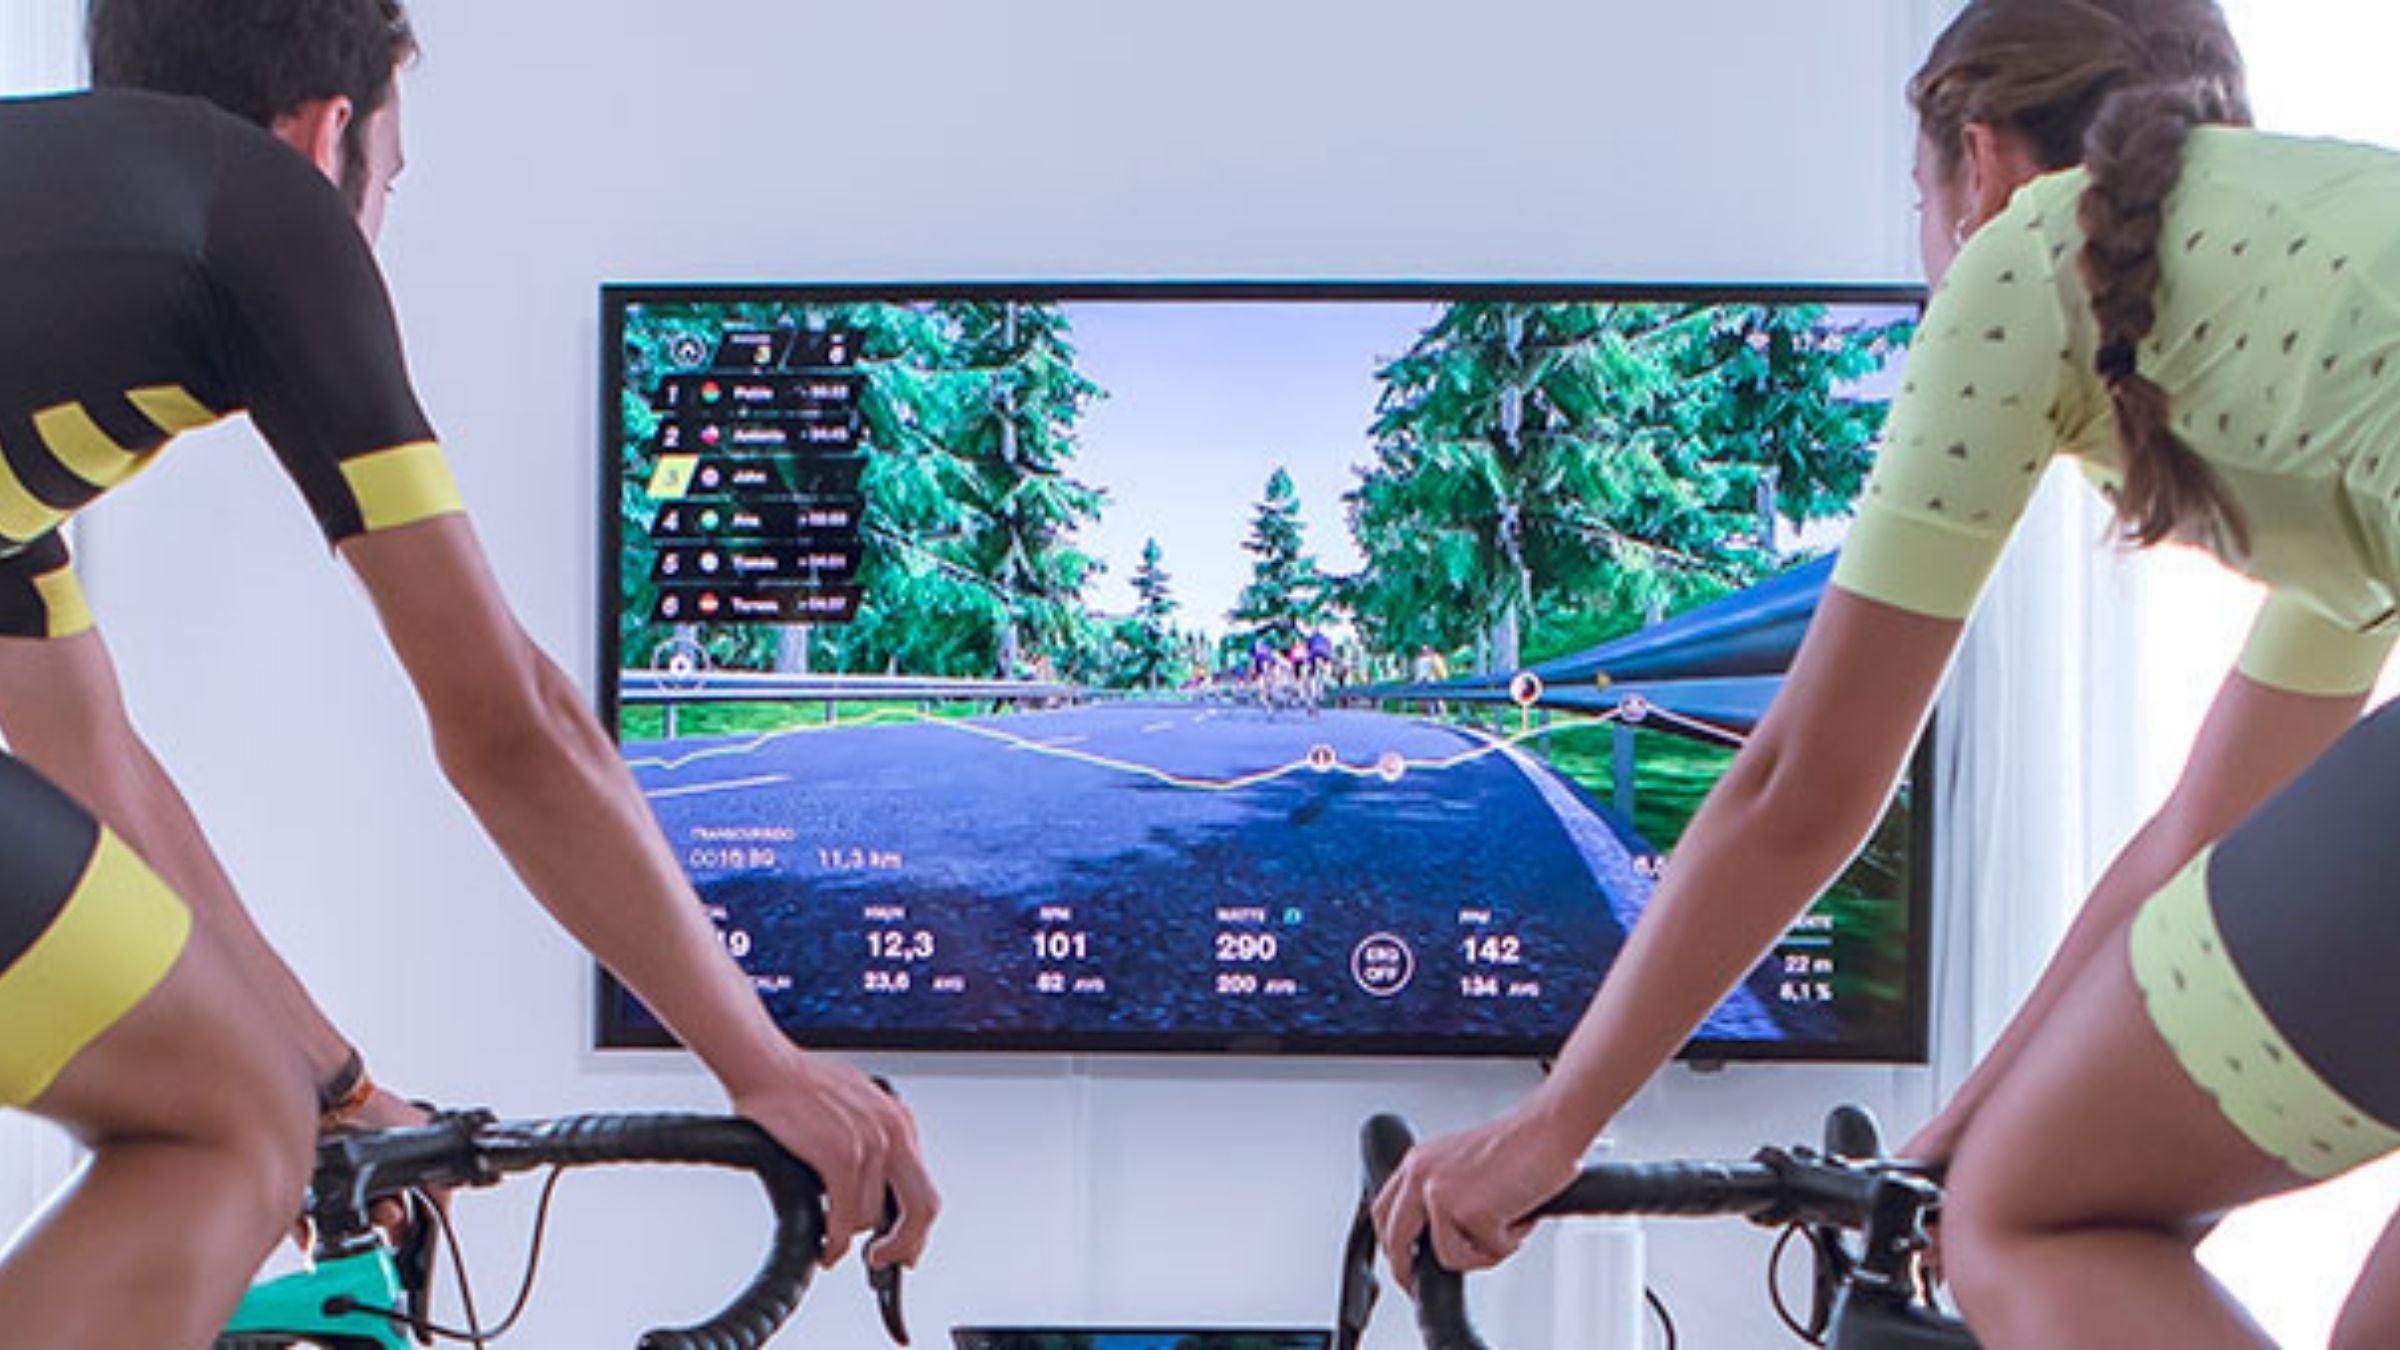 The Top 10 Indoor Cycling Platforms and Apps to Get You Through the Winter 